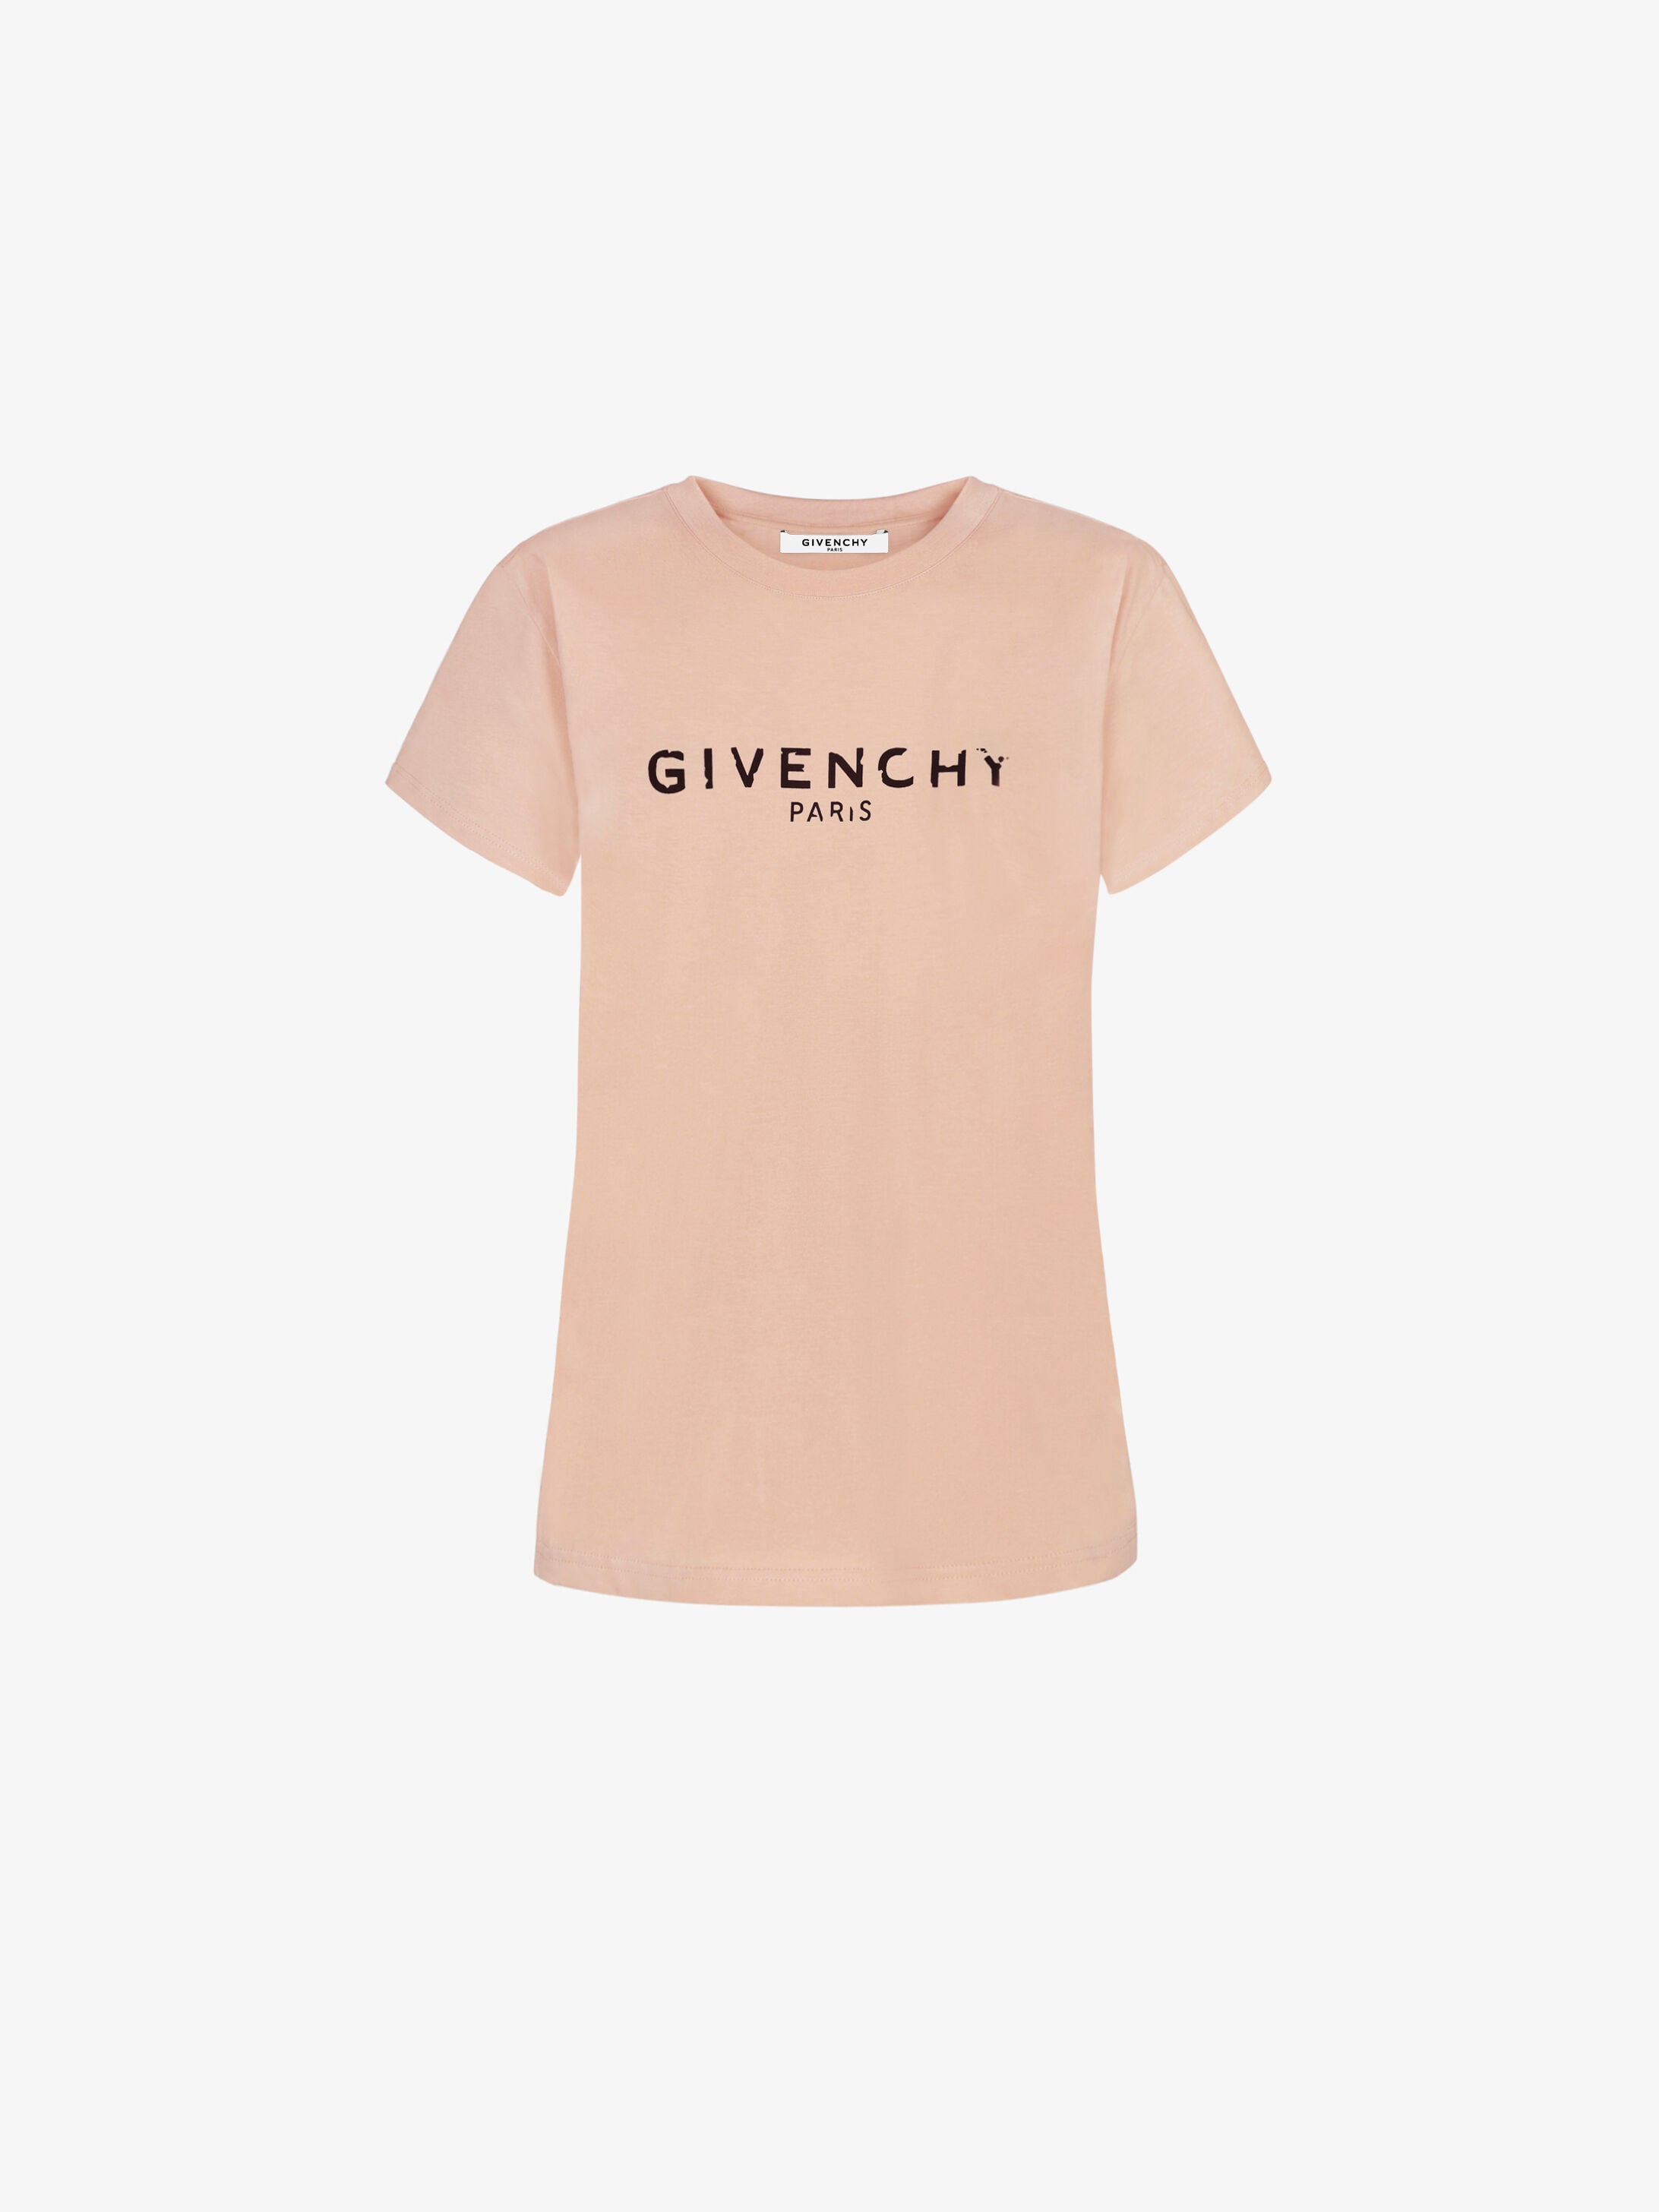 givenchy t shirt cost